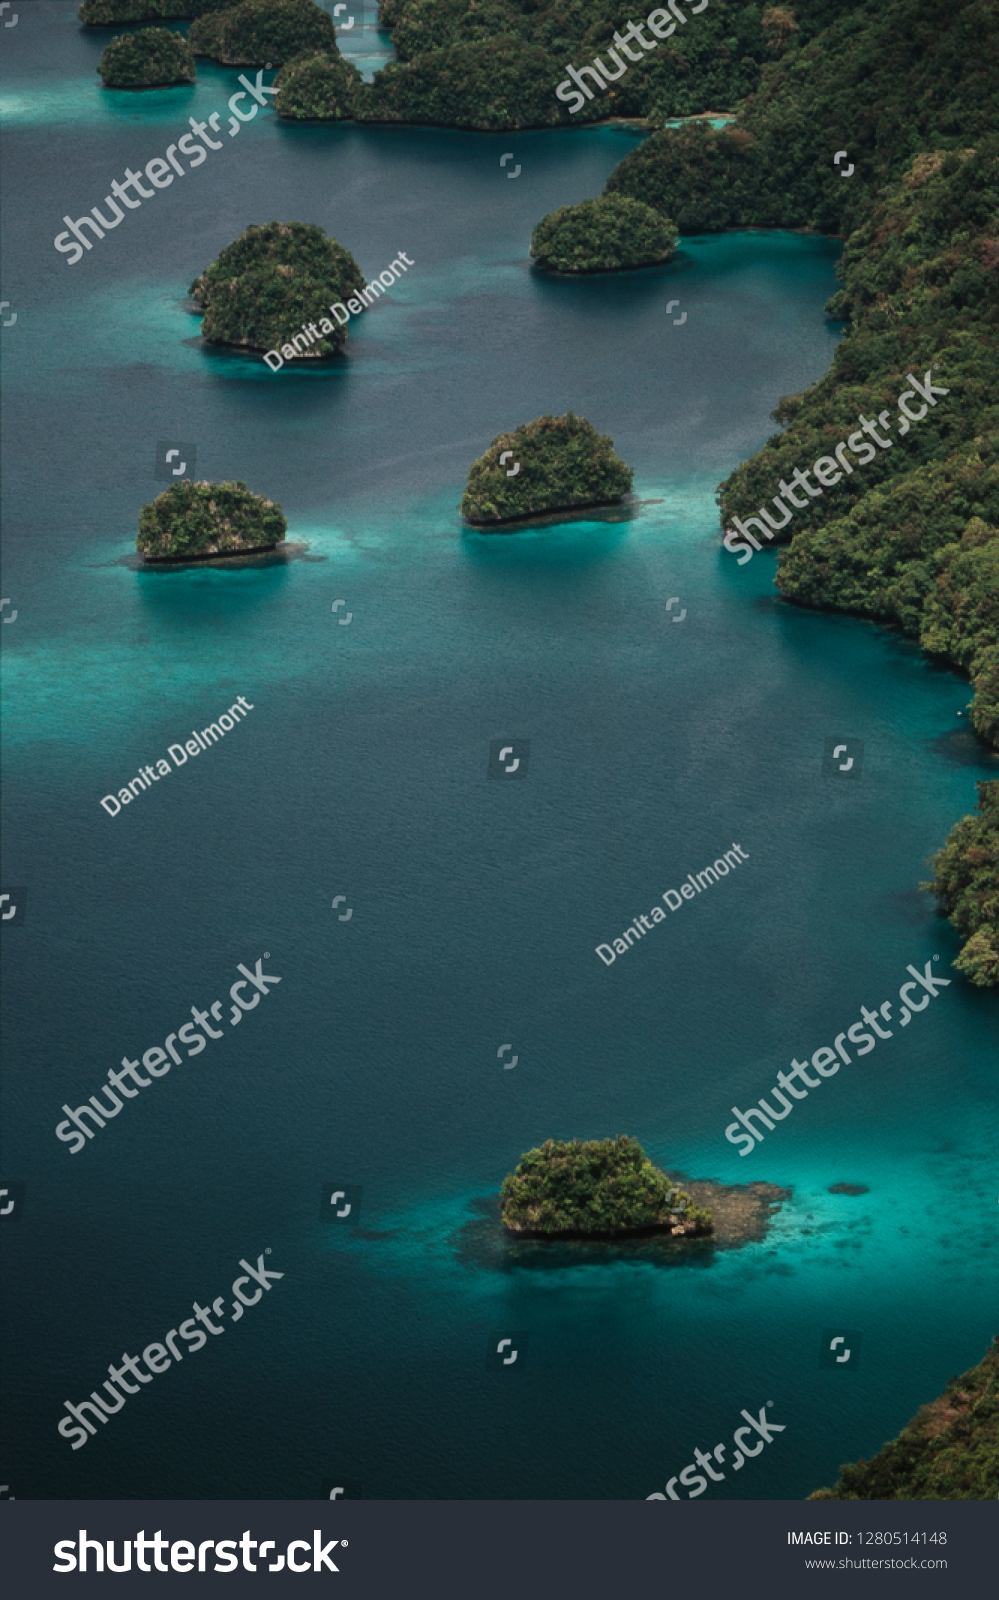 Micronesia, Palau, Aerial View of Rock Islands and World Heritage Site #1280514148